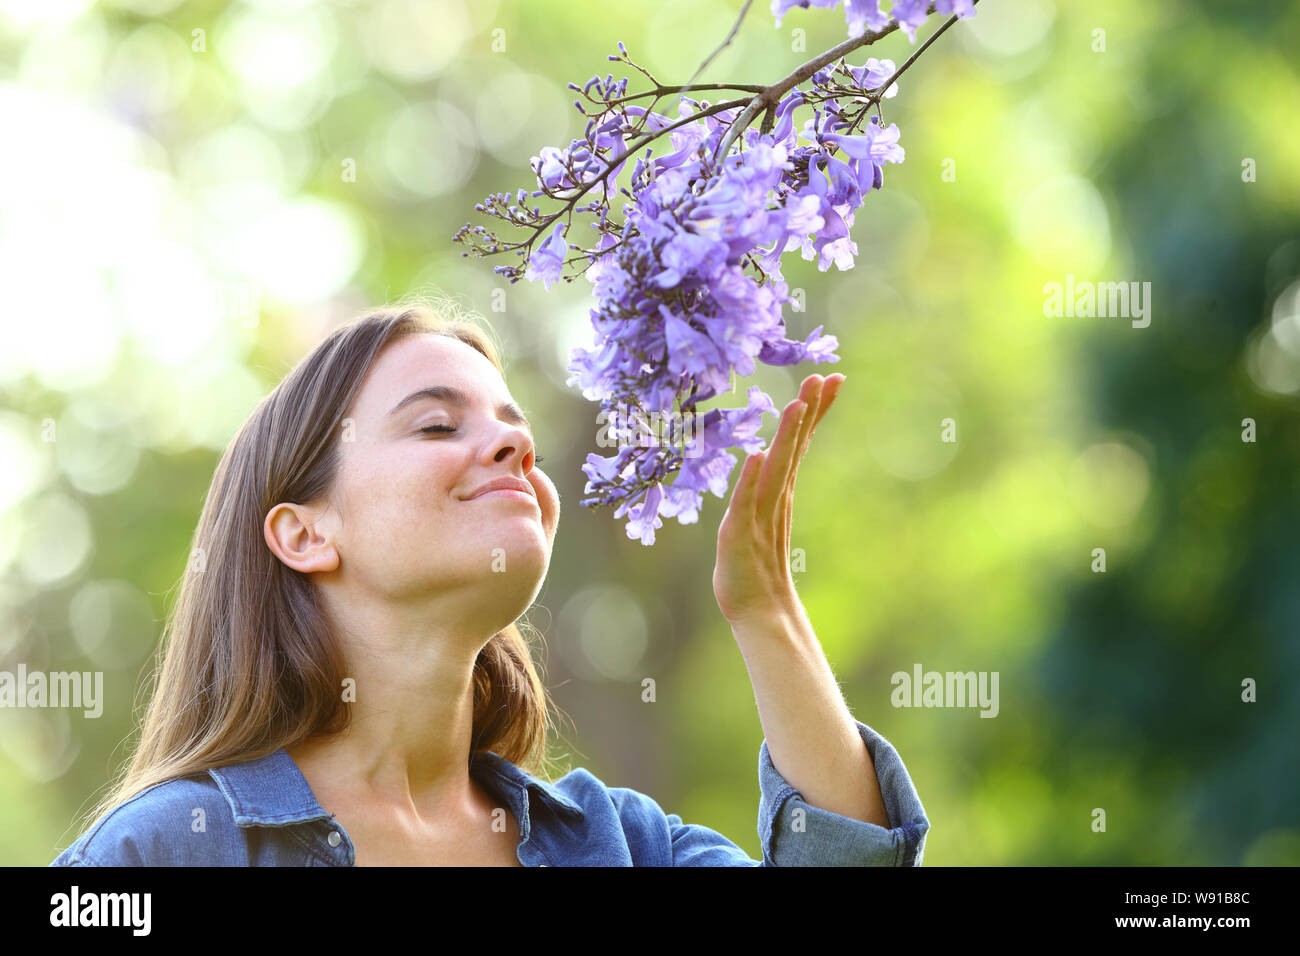 Candid woman smelling flowers standing in a park Stock Photo